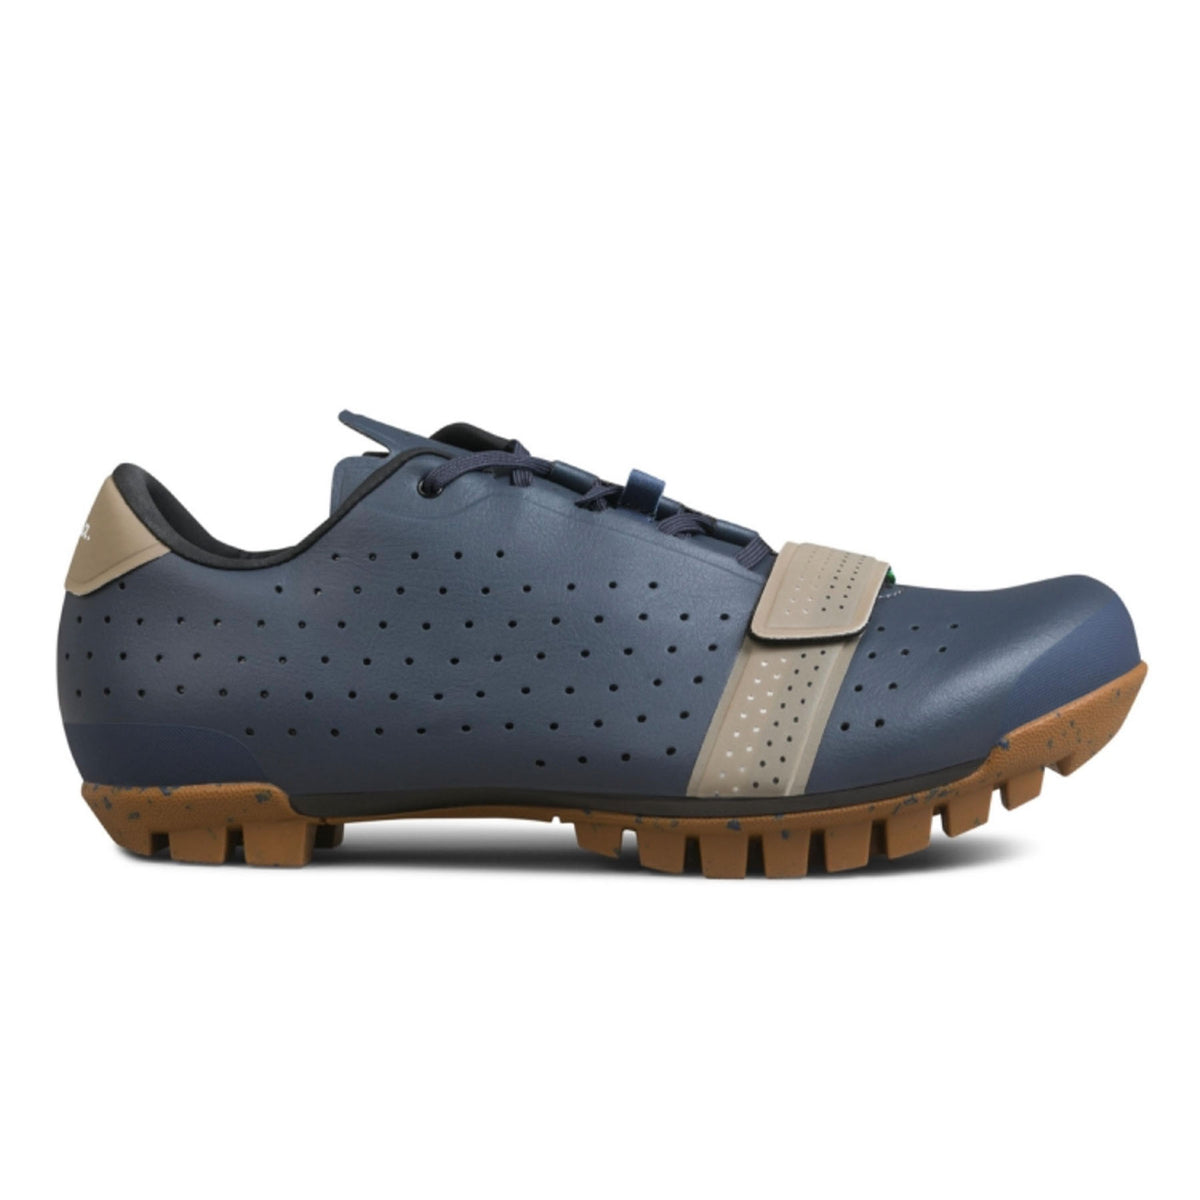 Hero image featuring a side angle shot of the Rapha Explore Shoe in Navy blue with light brown trim